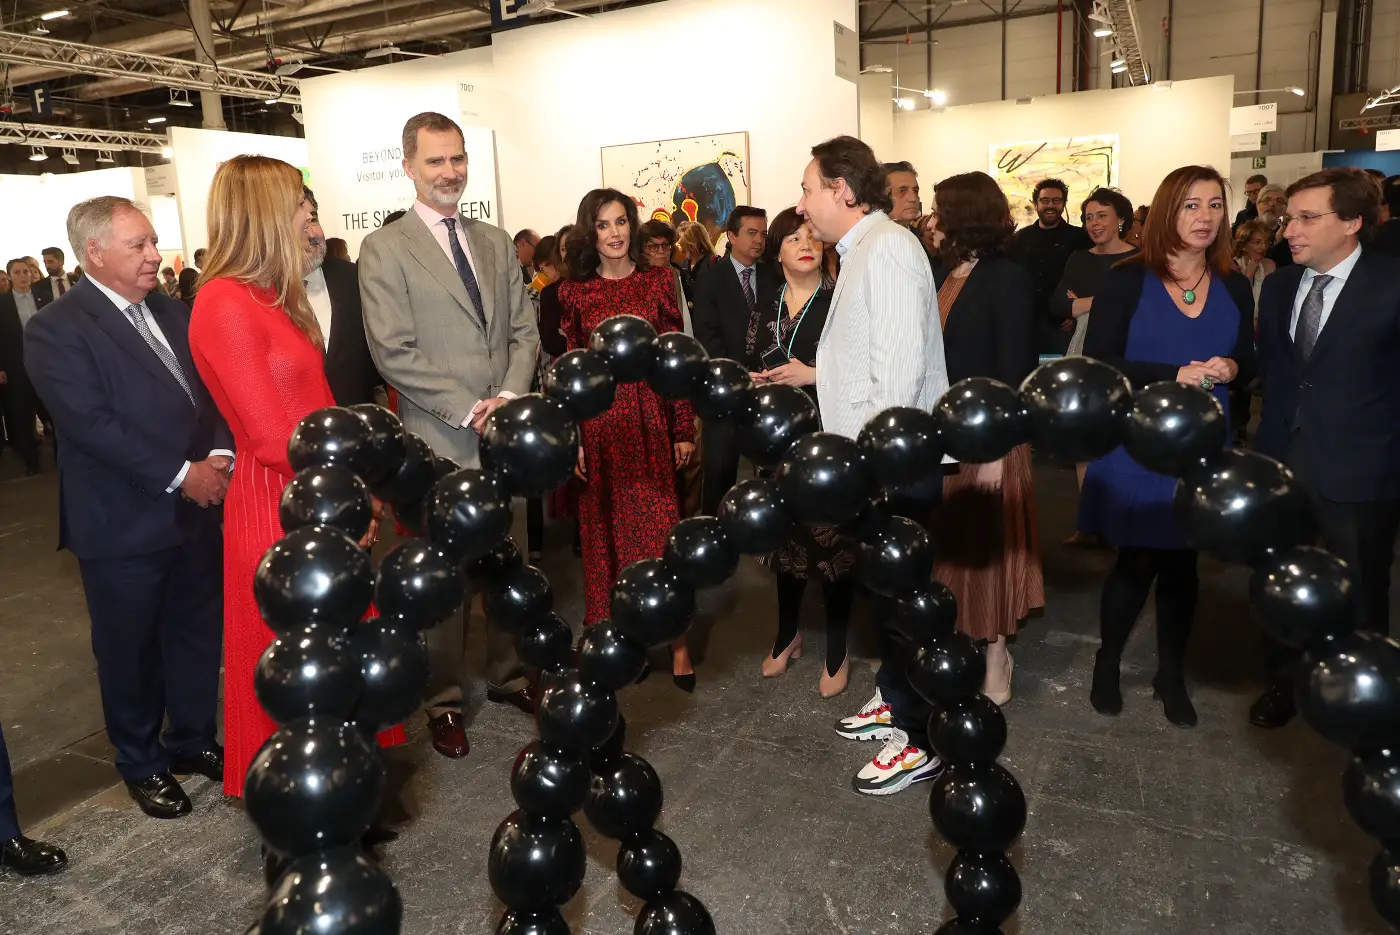 King Felipe and Queen Letizia attended the opening of Art Fair